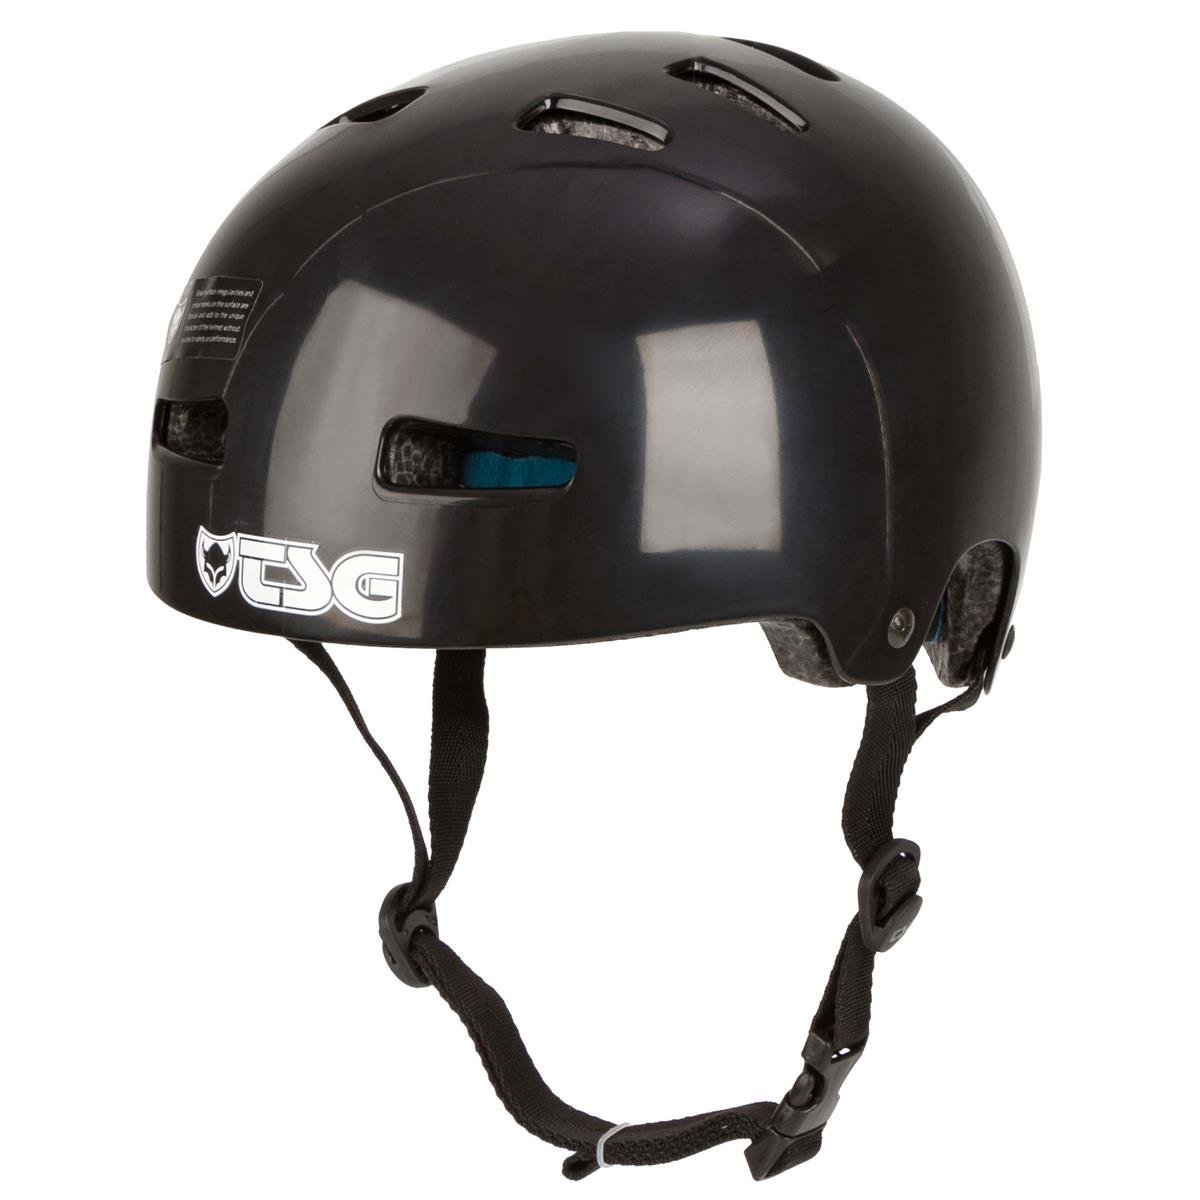 TSG Bimbo Casco BMX/Dirt Evolution Youth Injected Color - Injected Nero